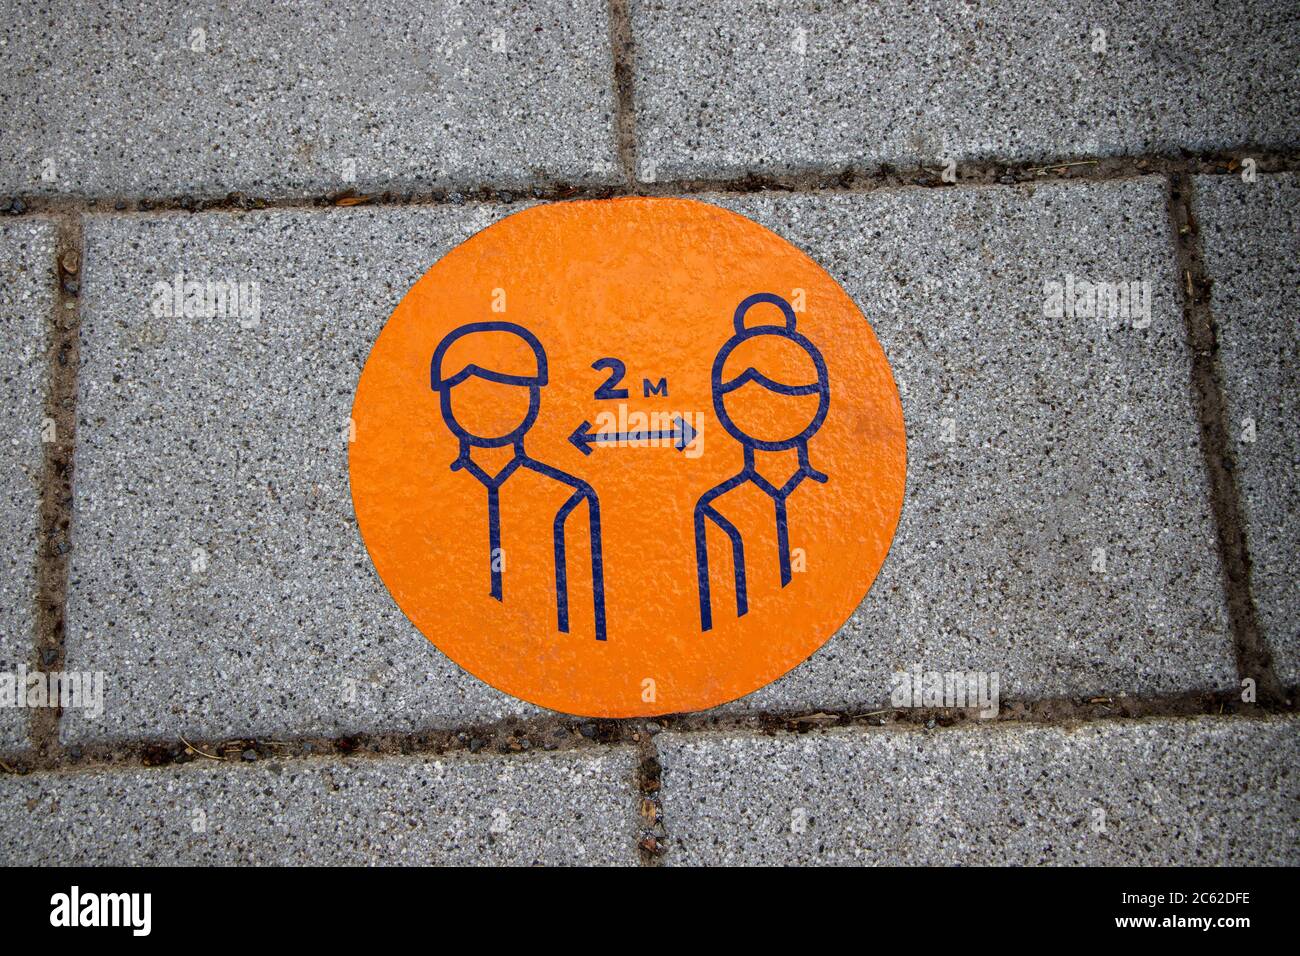 Orange circle decal marker 2m social distance on a commercial street on the ground sidewalk for passerby during COVID-19 Coronavirus Pandemic; Stock Photo